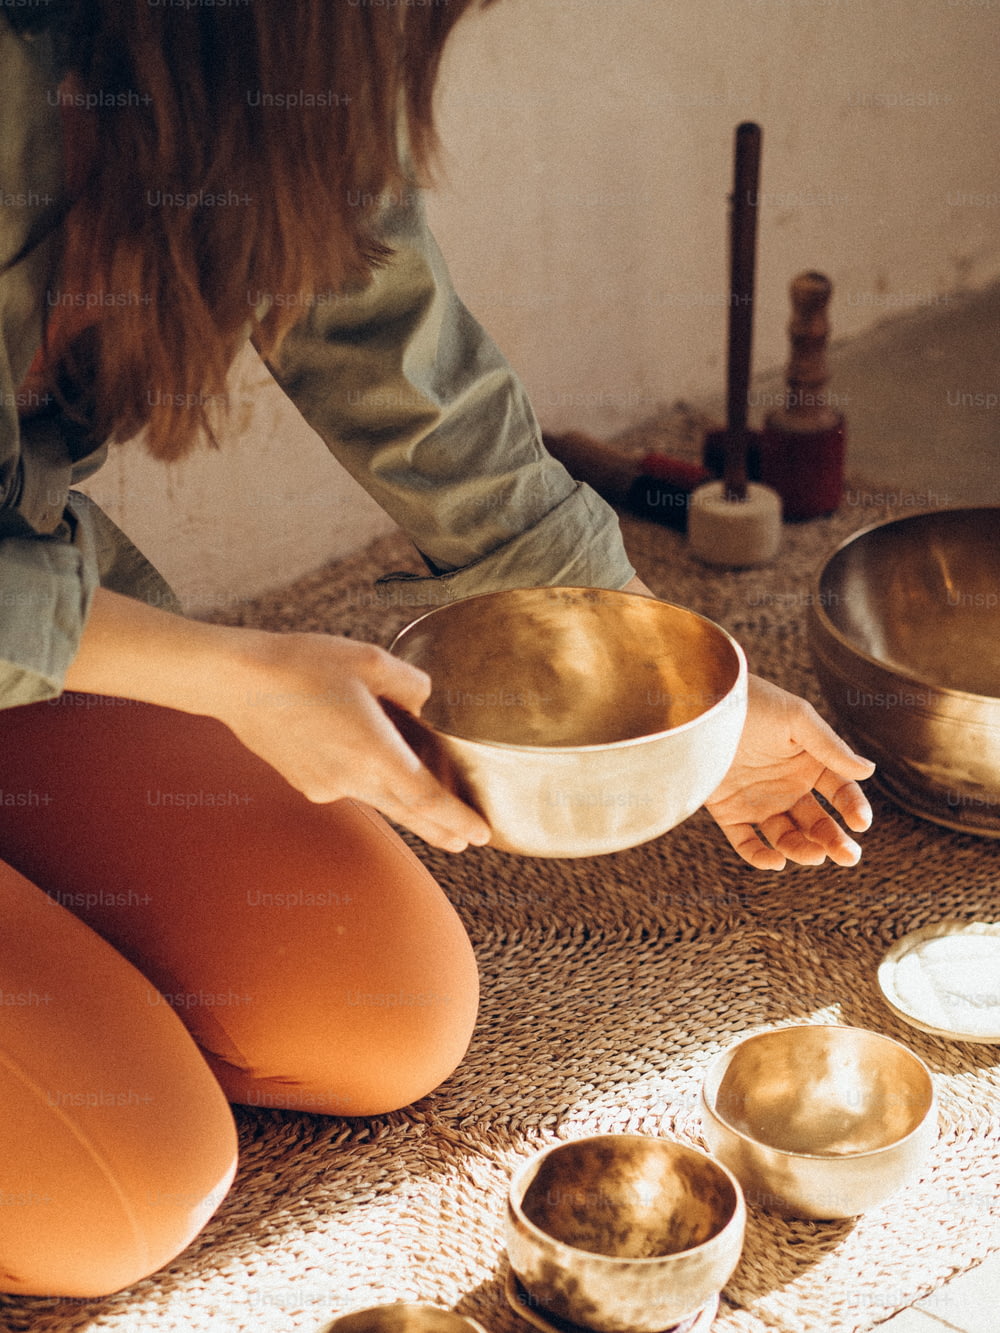 a woman sitting on the floor holding a bowl